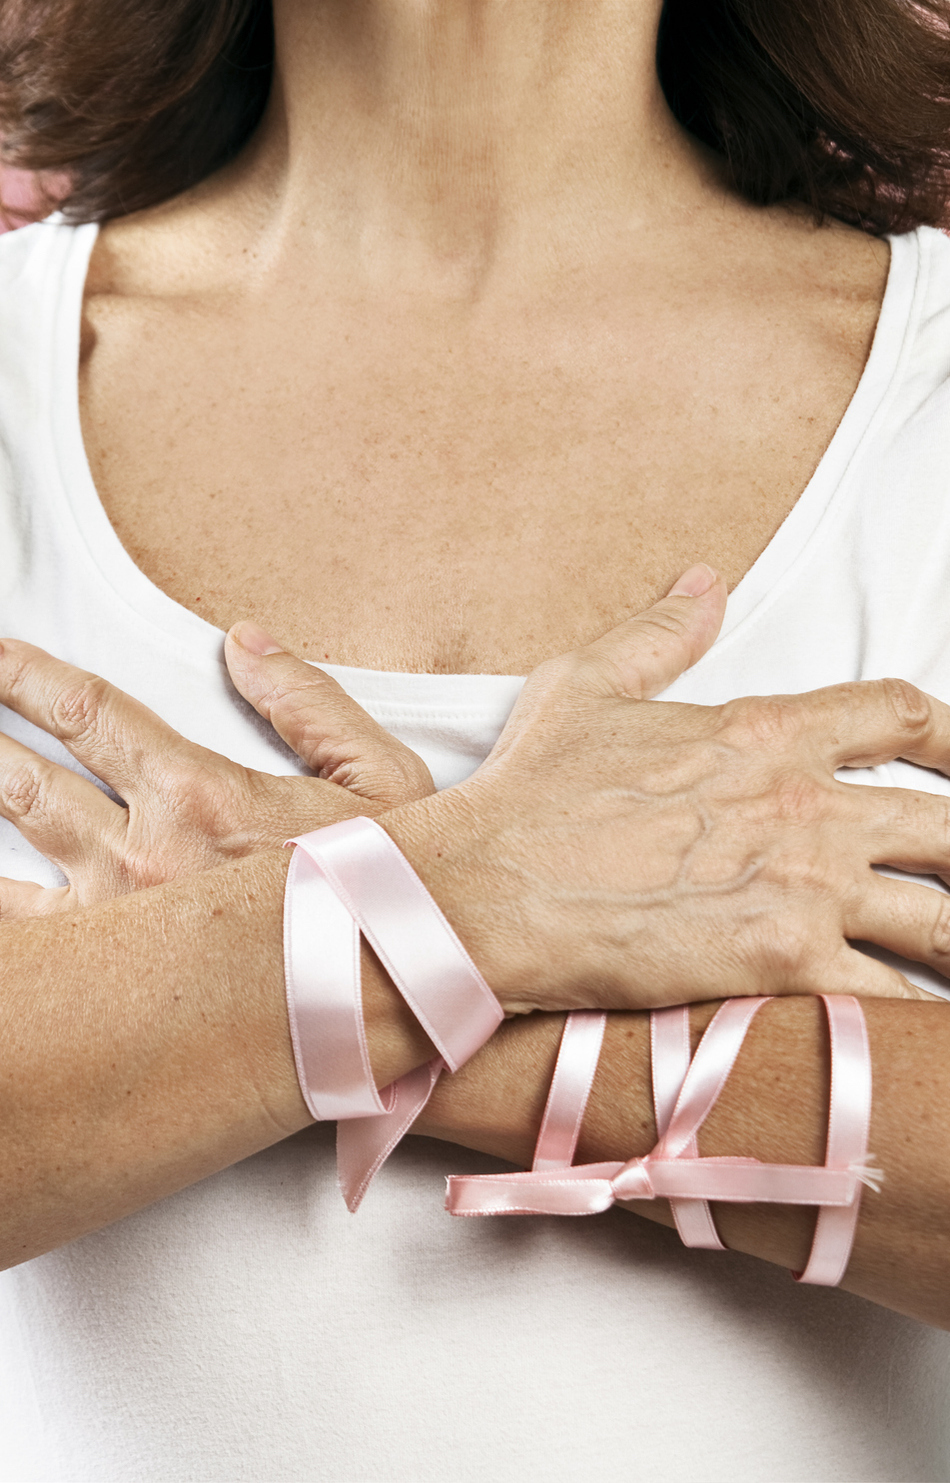 Breast Reconstructive Surgery: During or After a Mastectomy?